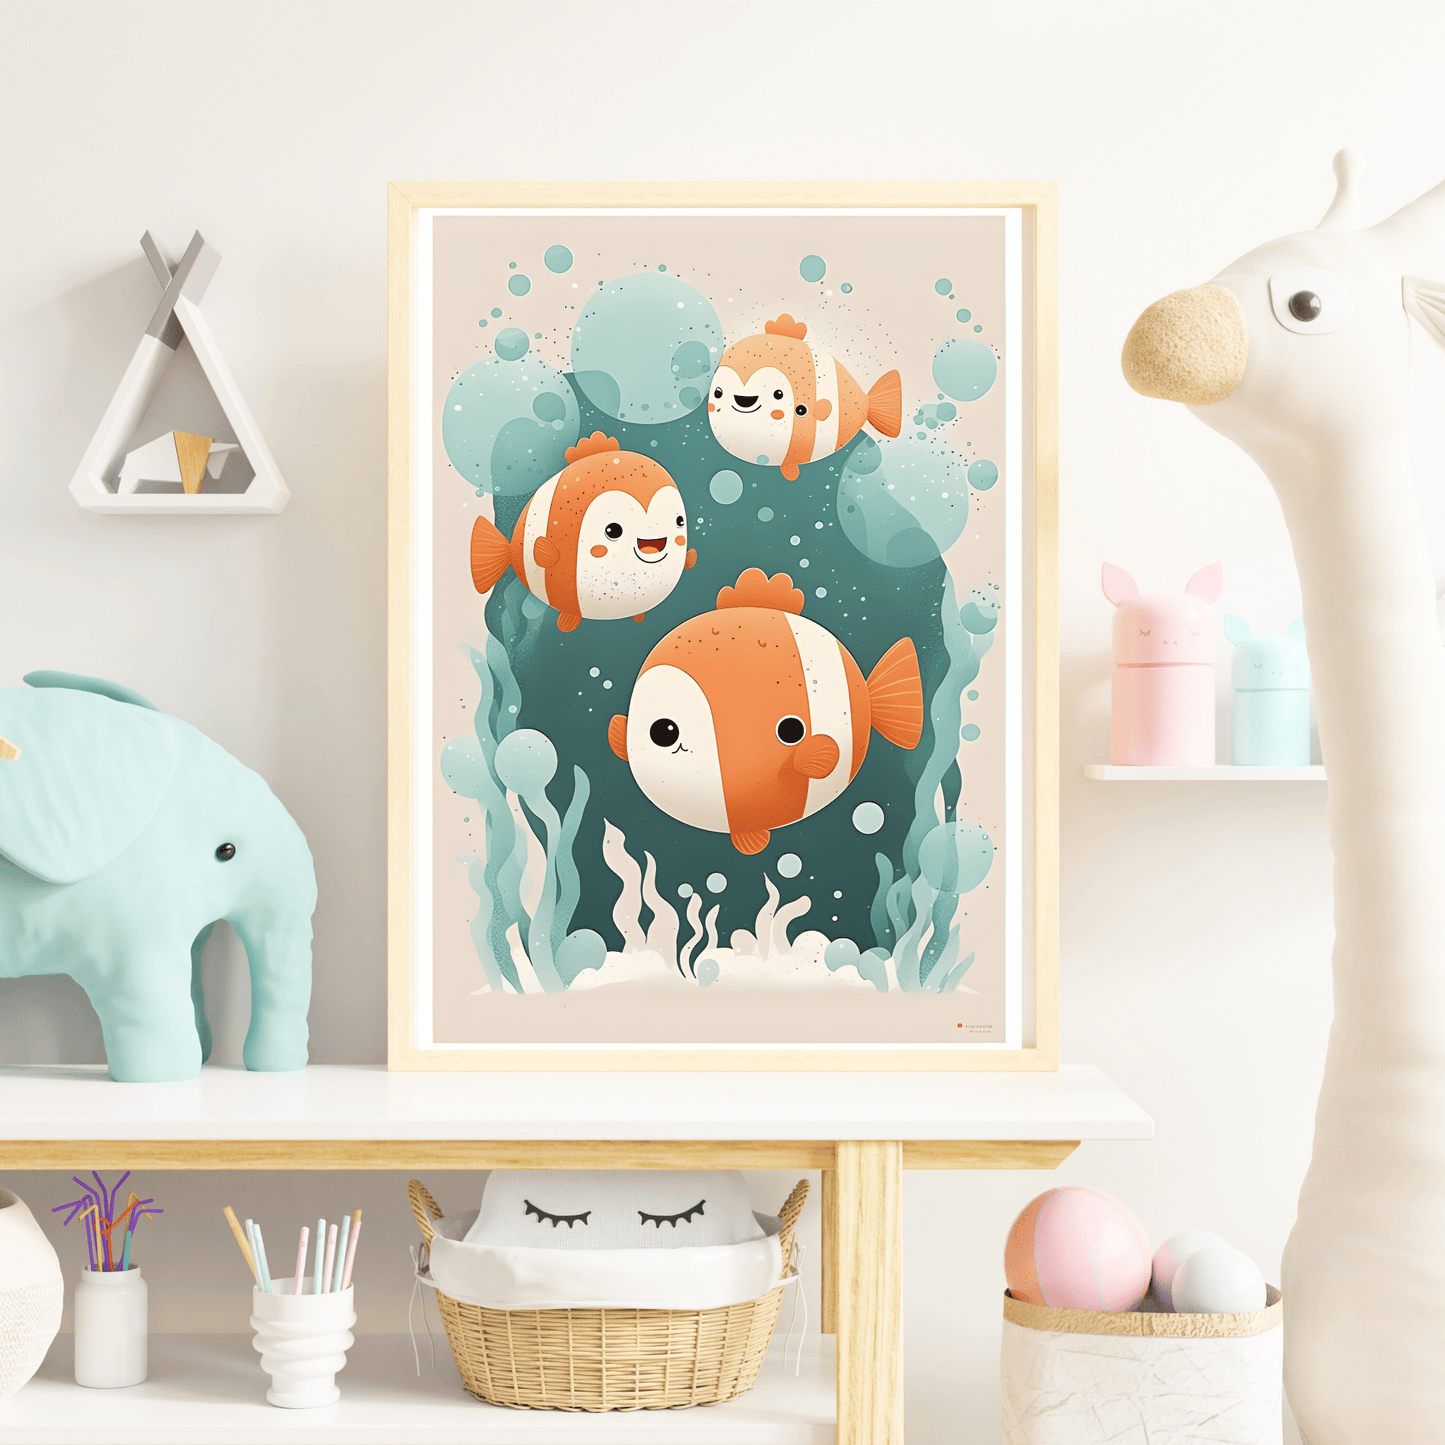 kids play room decorated with a clown fish poster surrounded by stuff toys